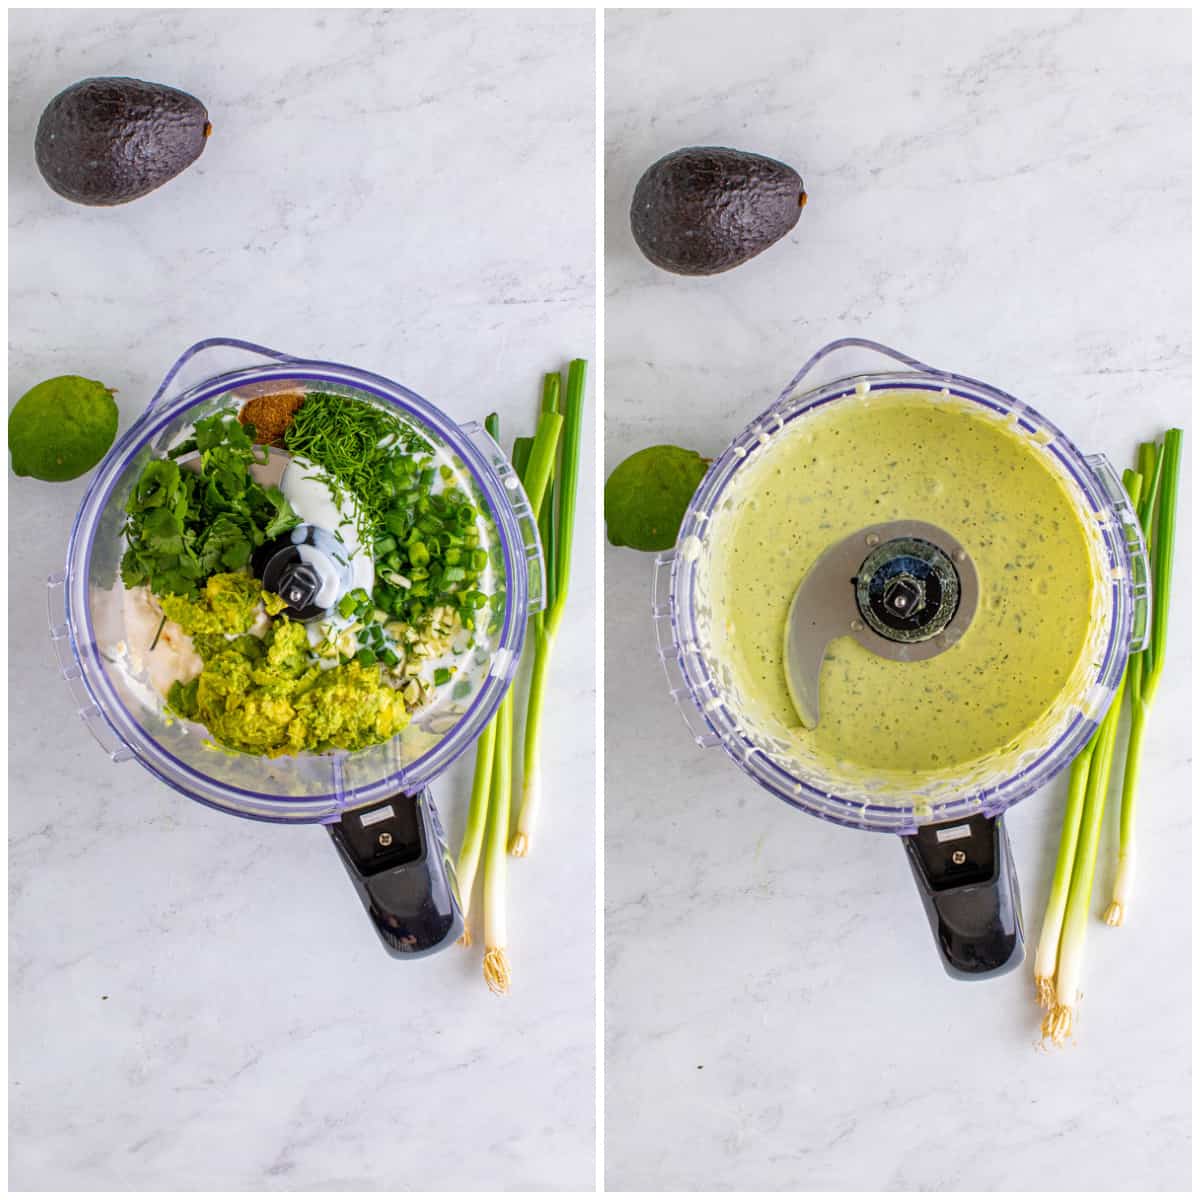 Step by step photos on how to make Avocado Ranch.